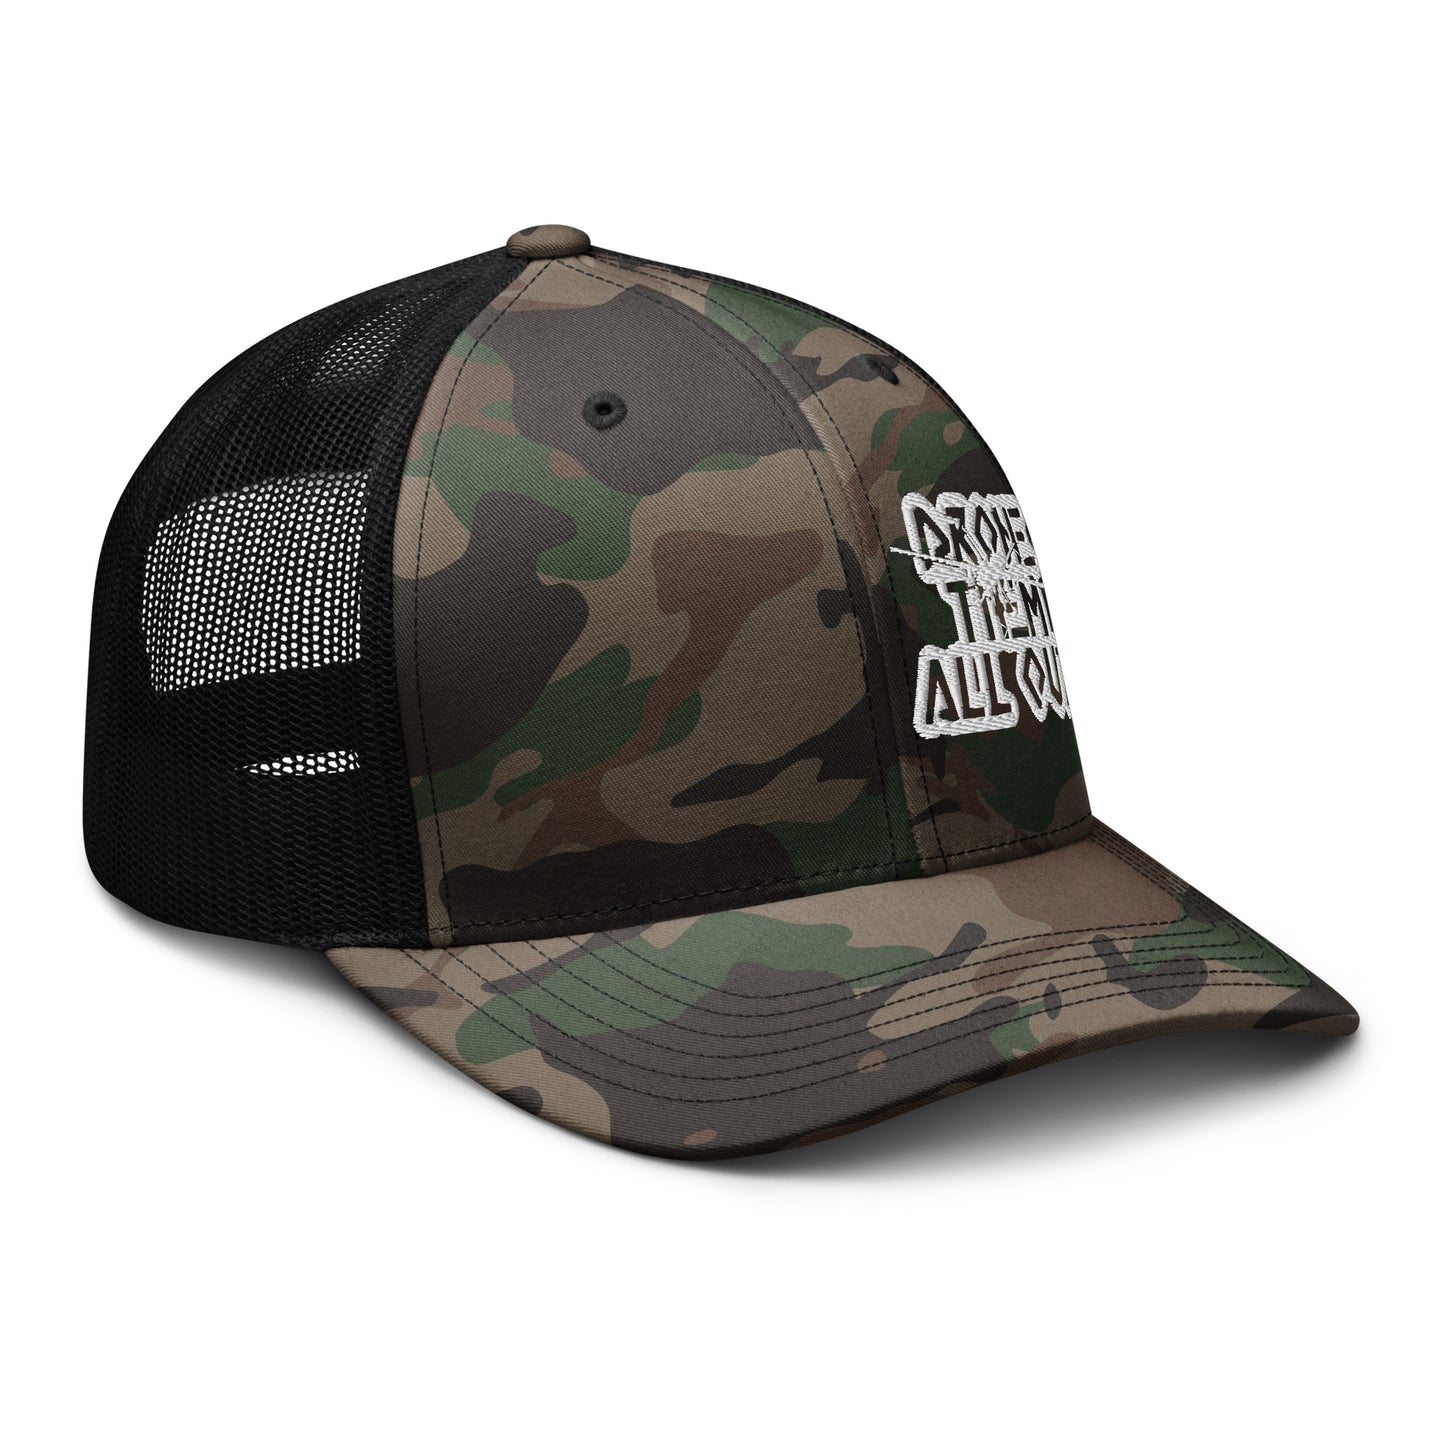 Drone Them Out- Reaper Camouflage trucker hat